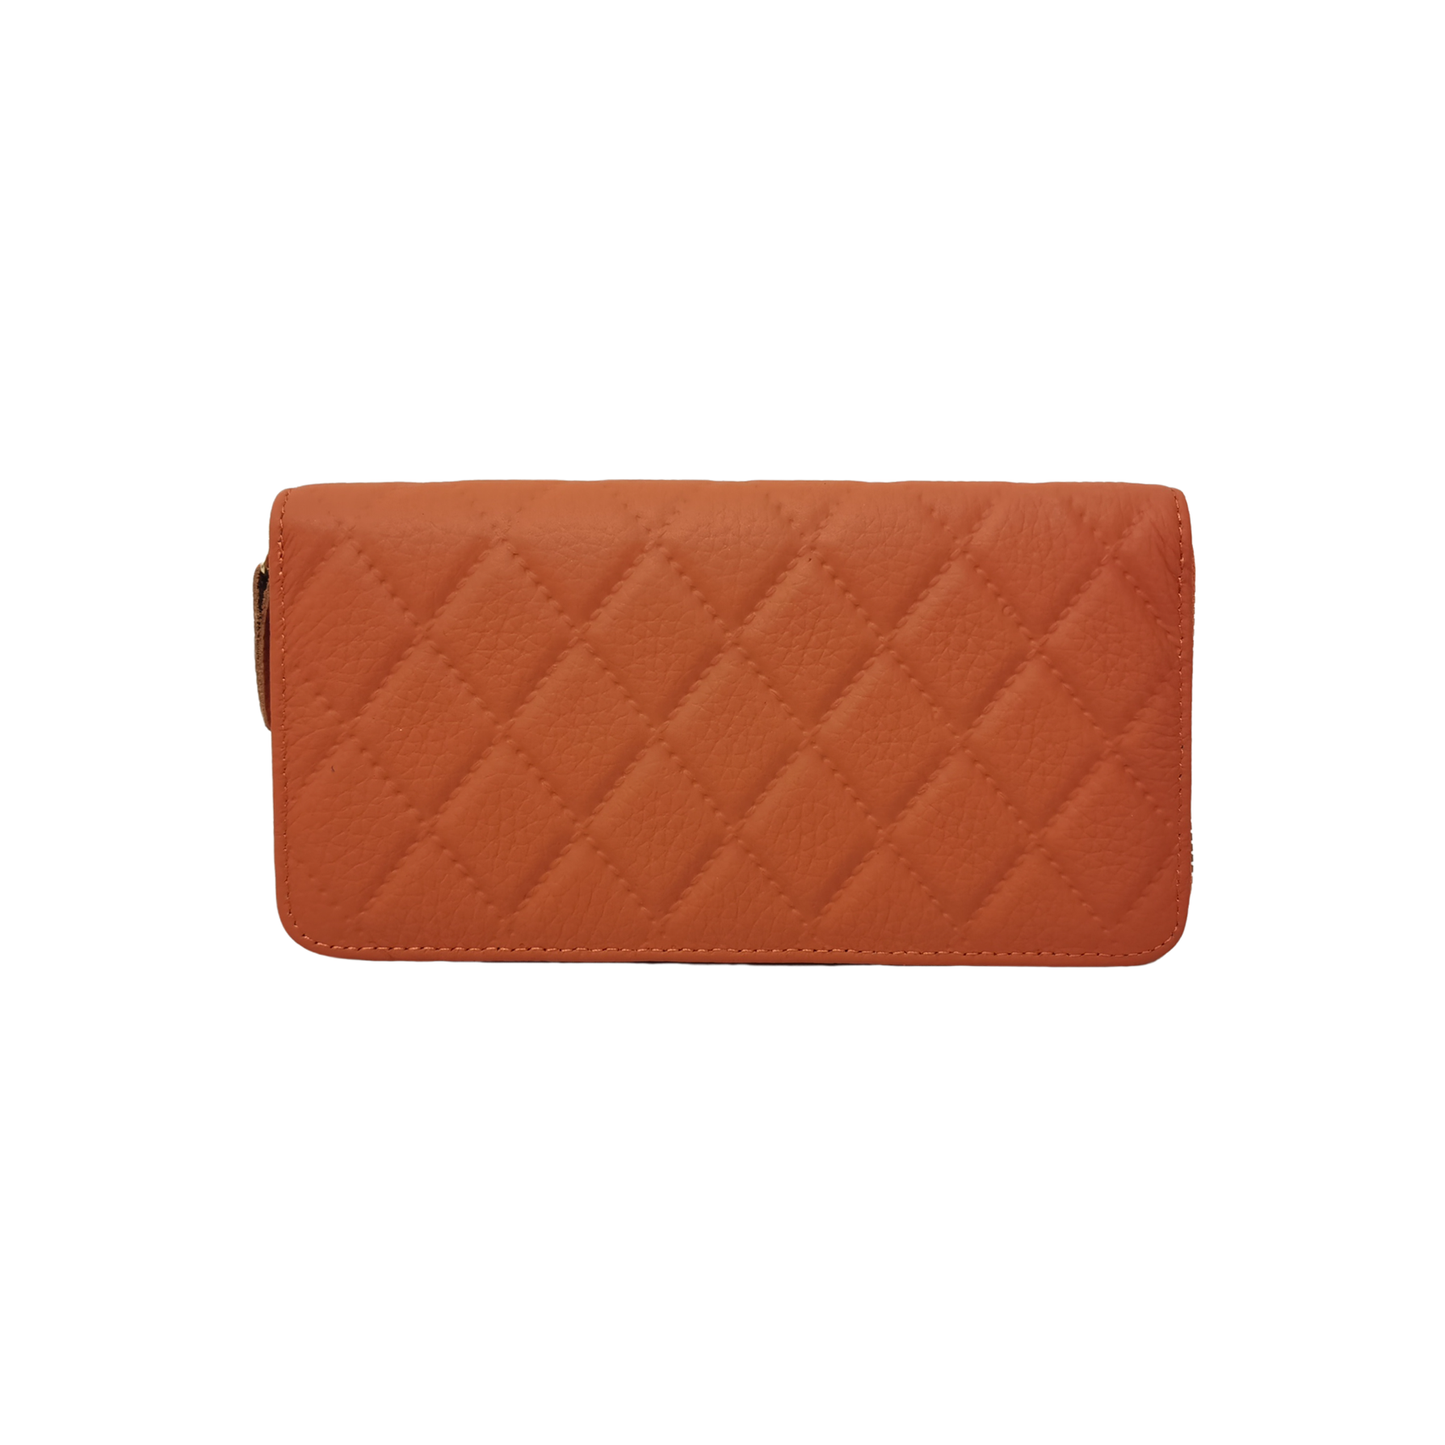 Women's genuine cowhide leather wallet Vyar V2 design by Tomorrow Closet